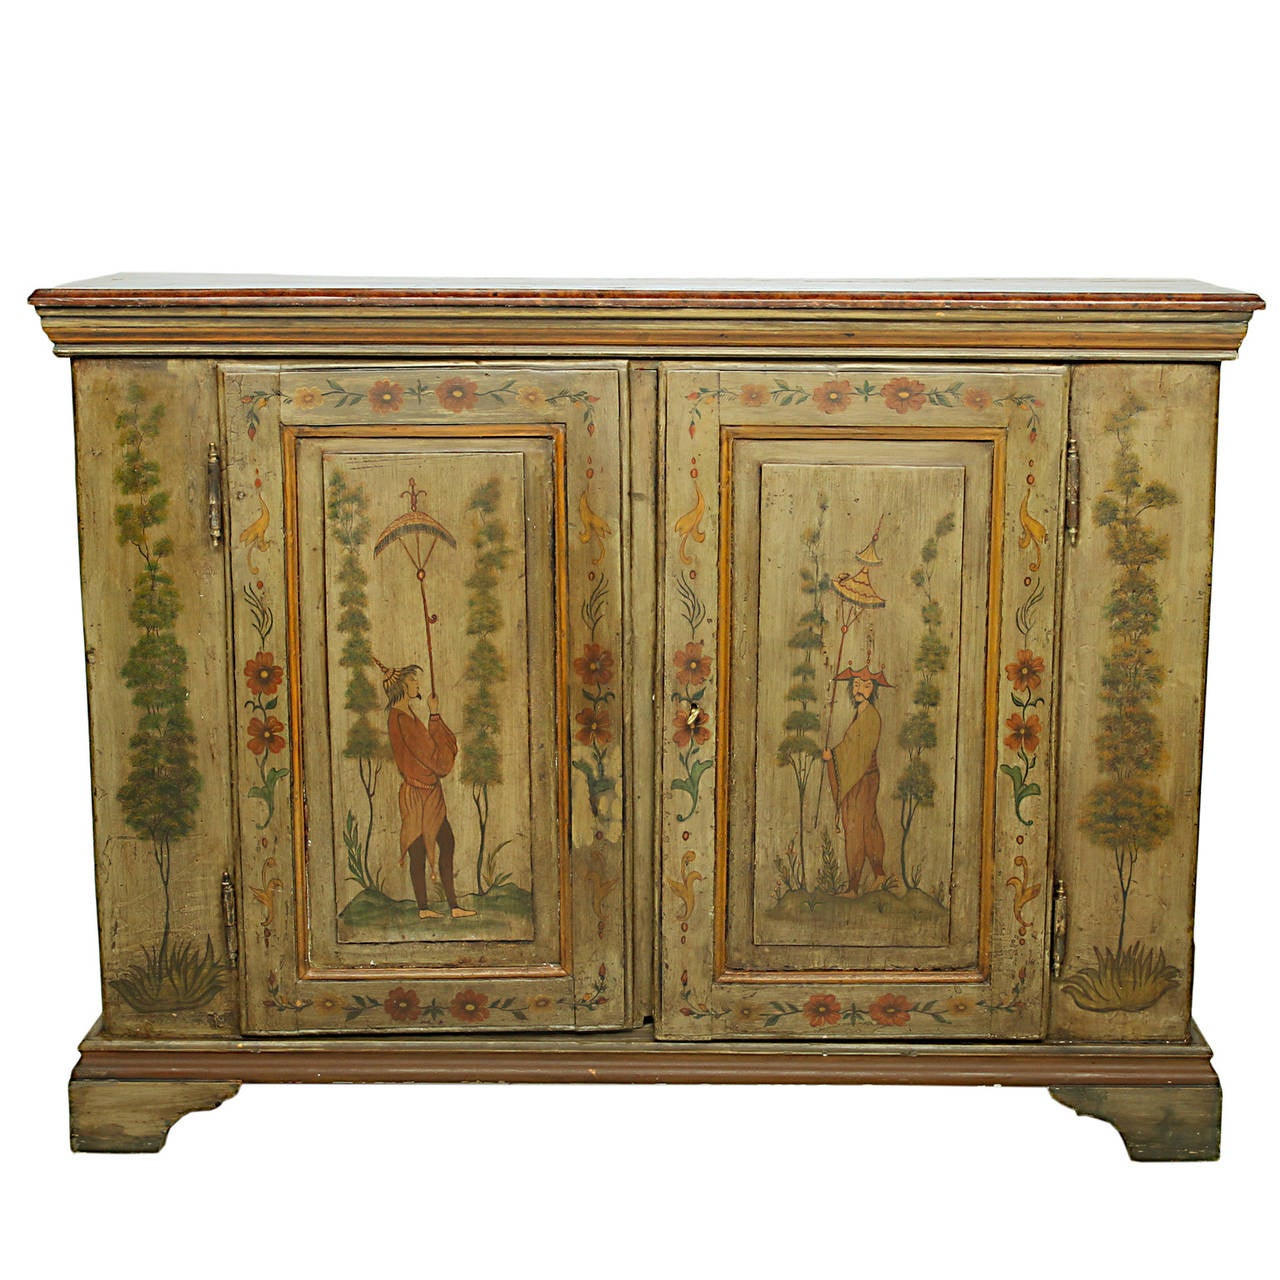 A fine pair of oriental style painted matching cabinets from France. The top is a faux painted top. Keys for both doors. These have two doors each which open to a shelf and ample storage. Wonderful color scheme.